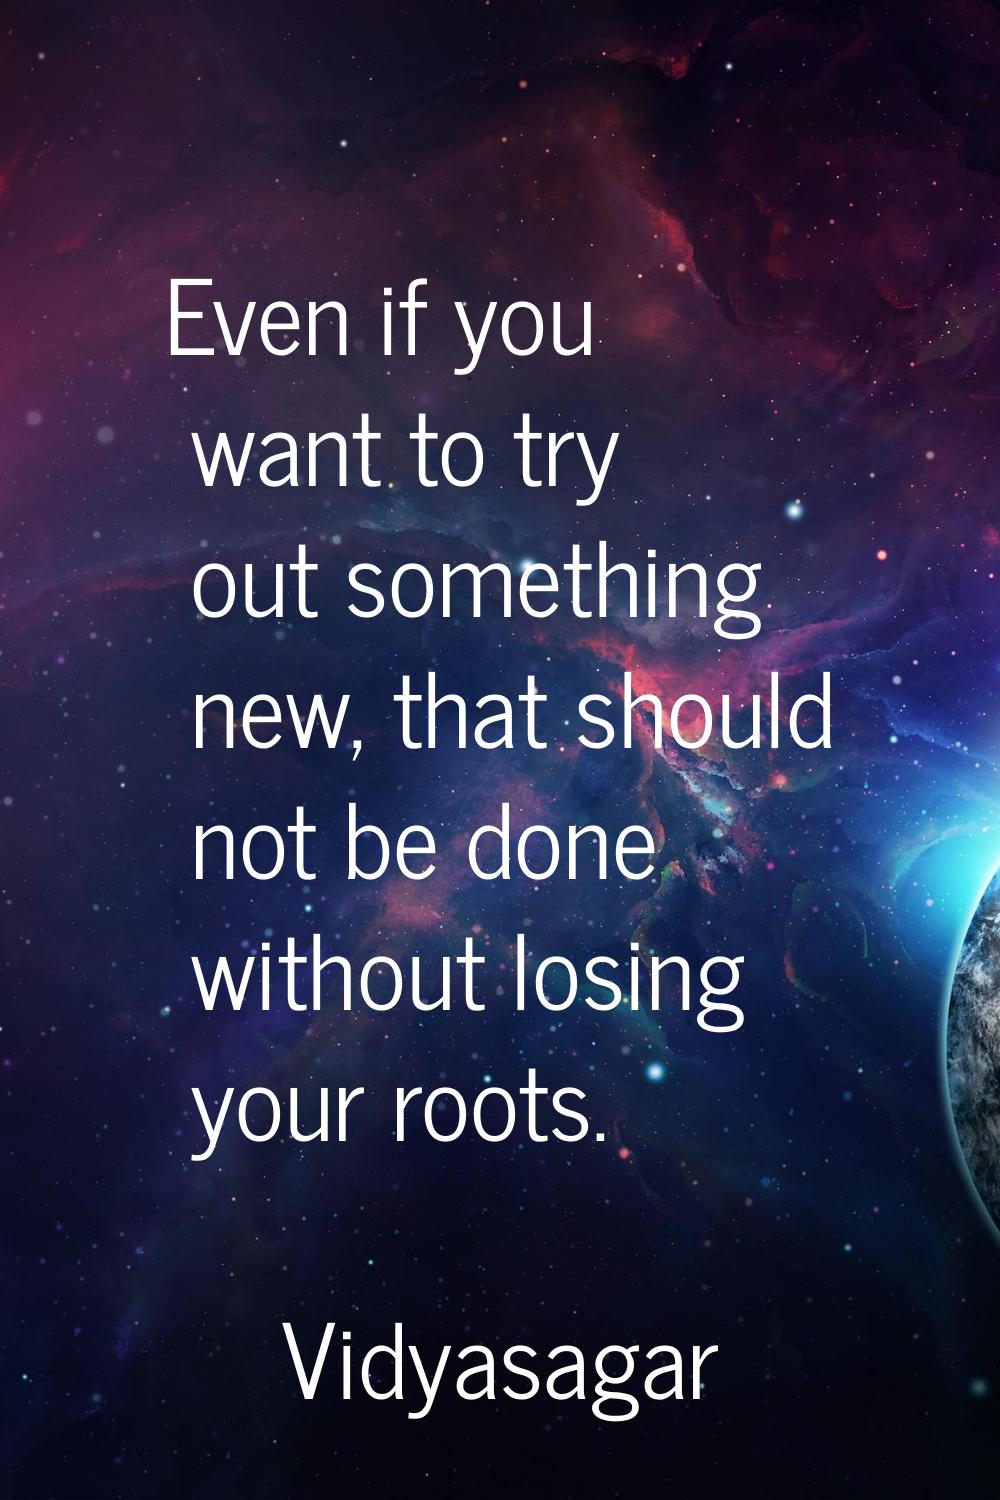 Even if you want to try out something new, that should not be done without losing your roots.